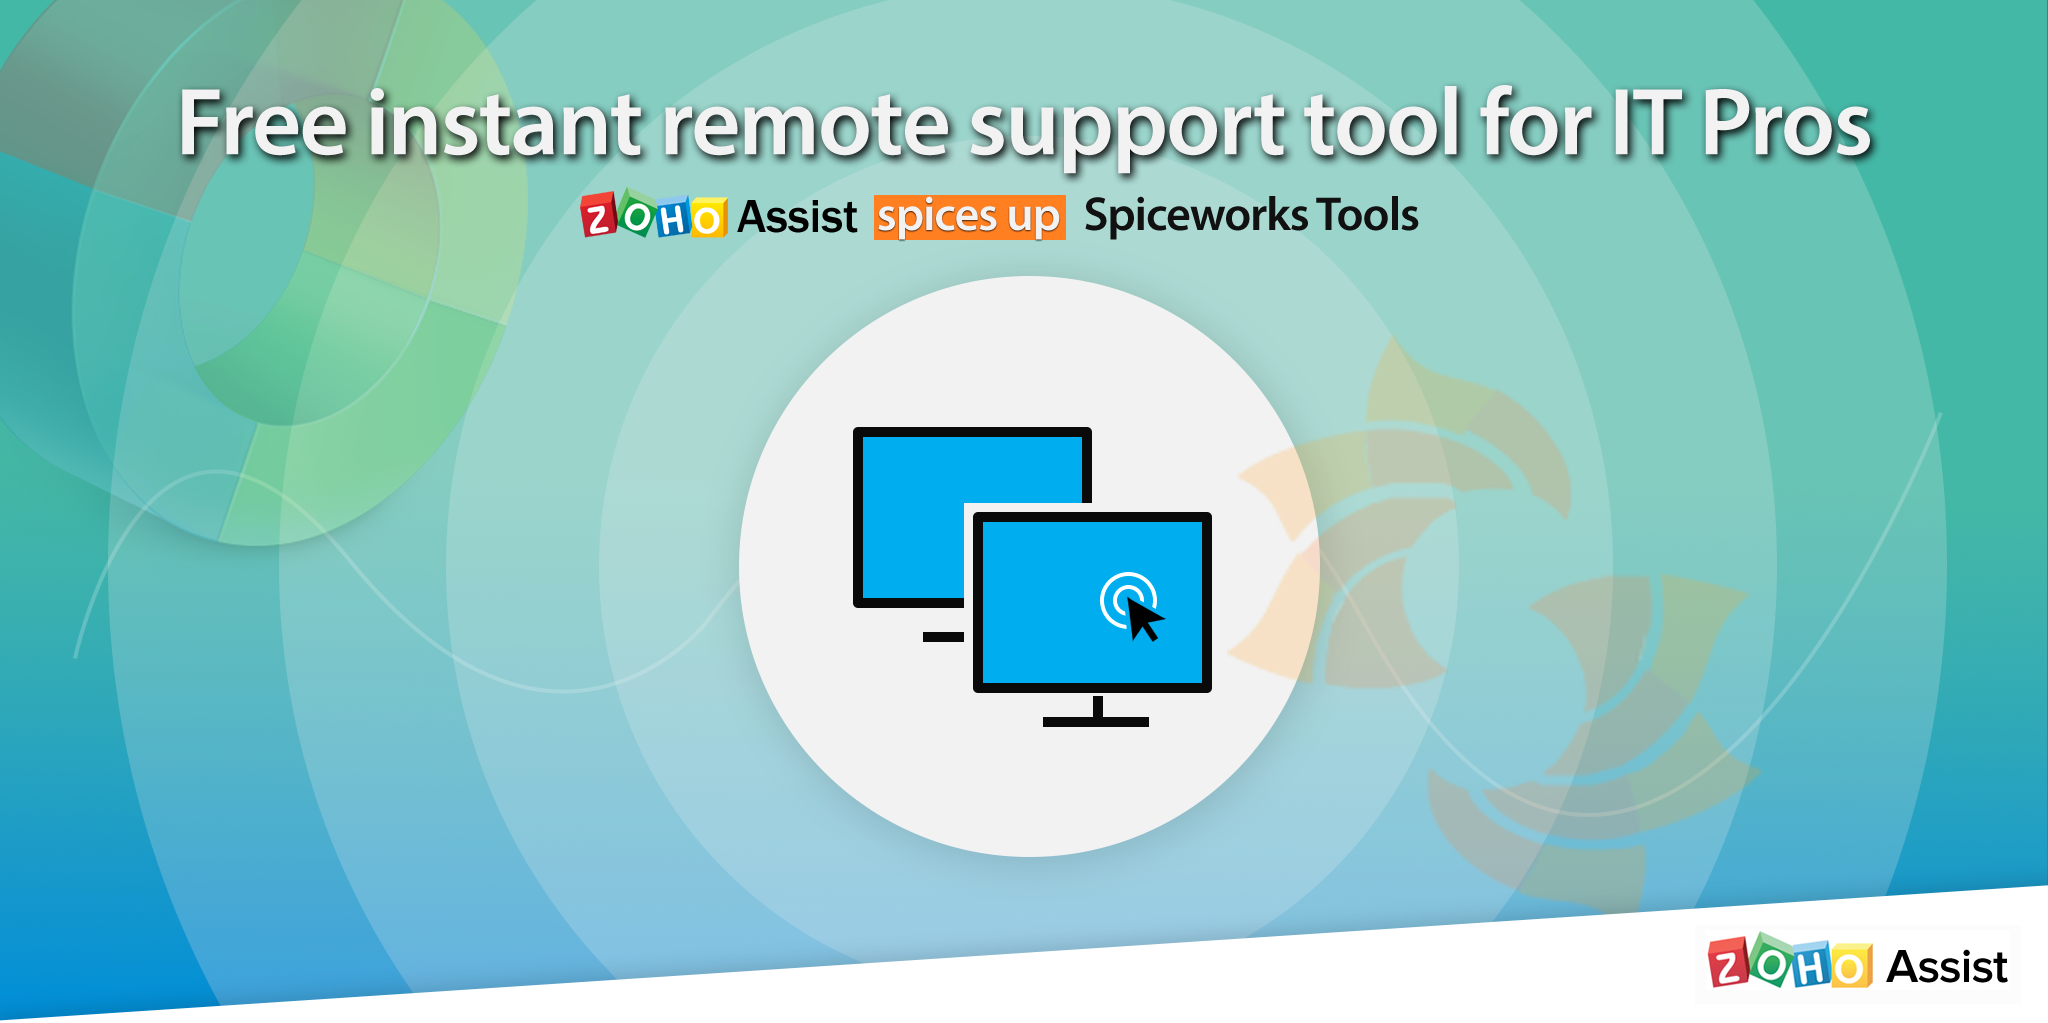 Free Remote Support Tool from Spiceworks - Powered by Zoho Assist